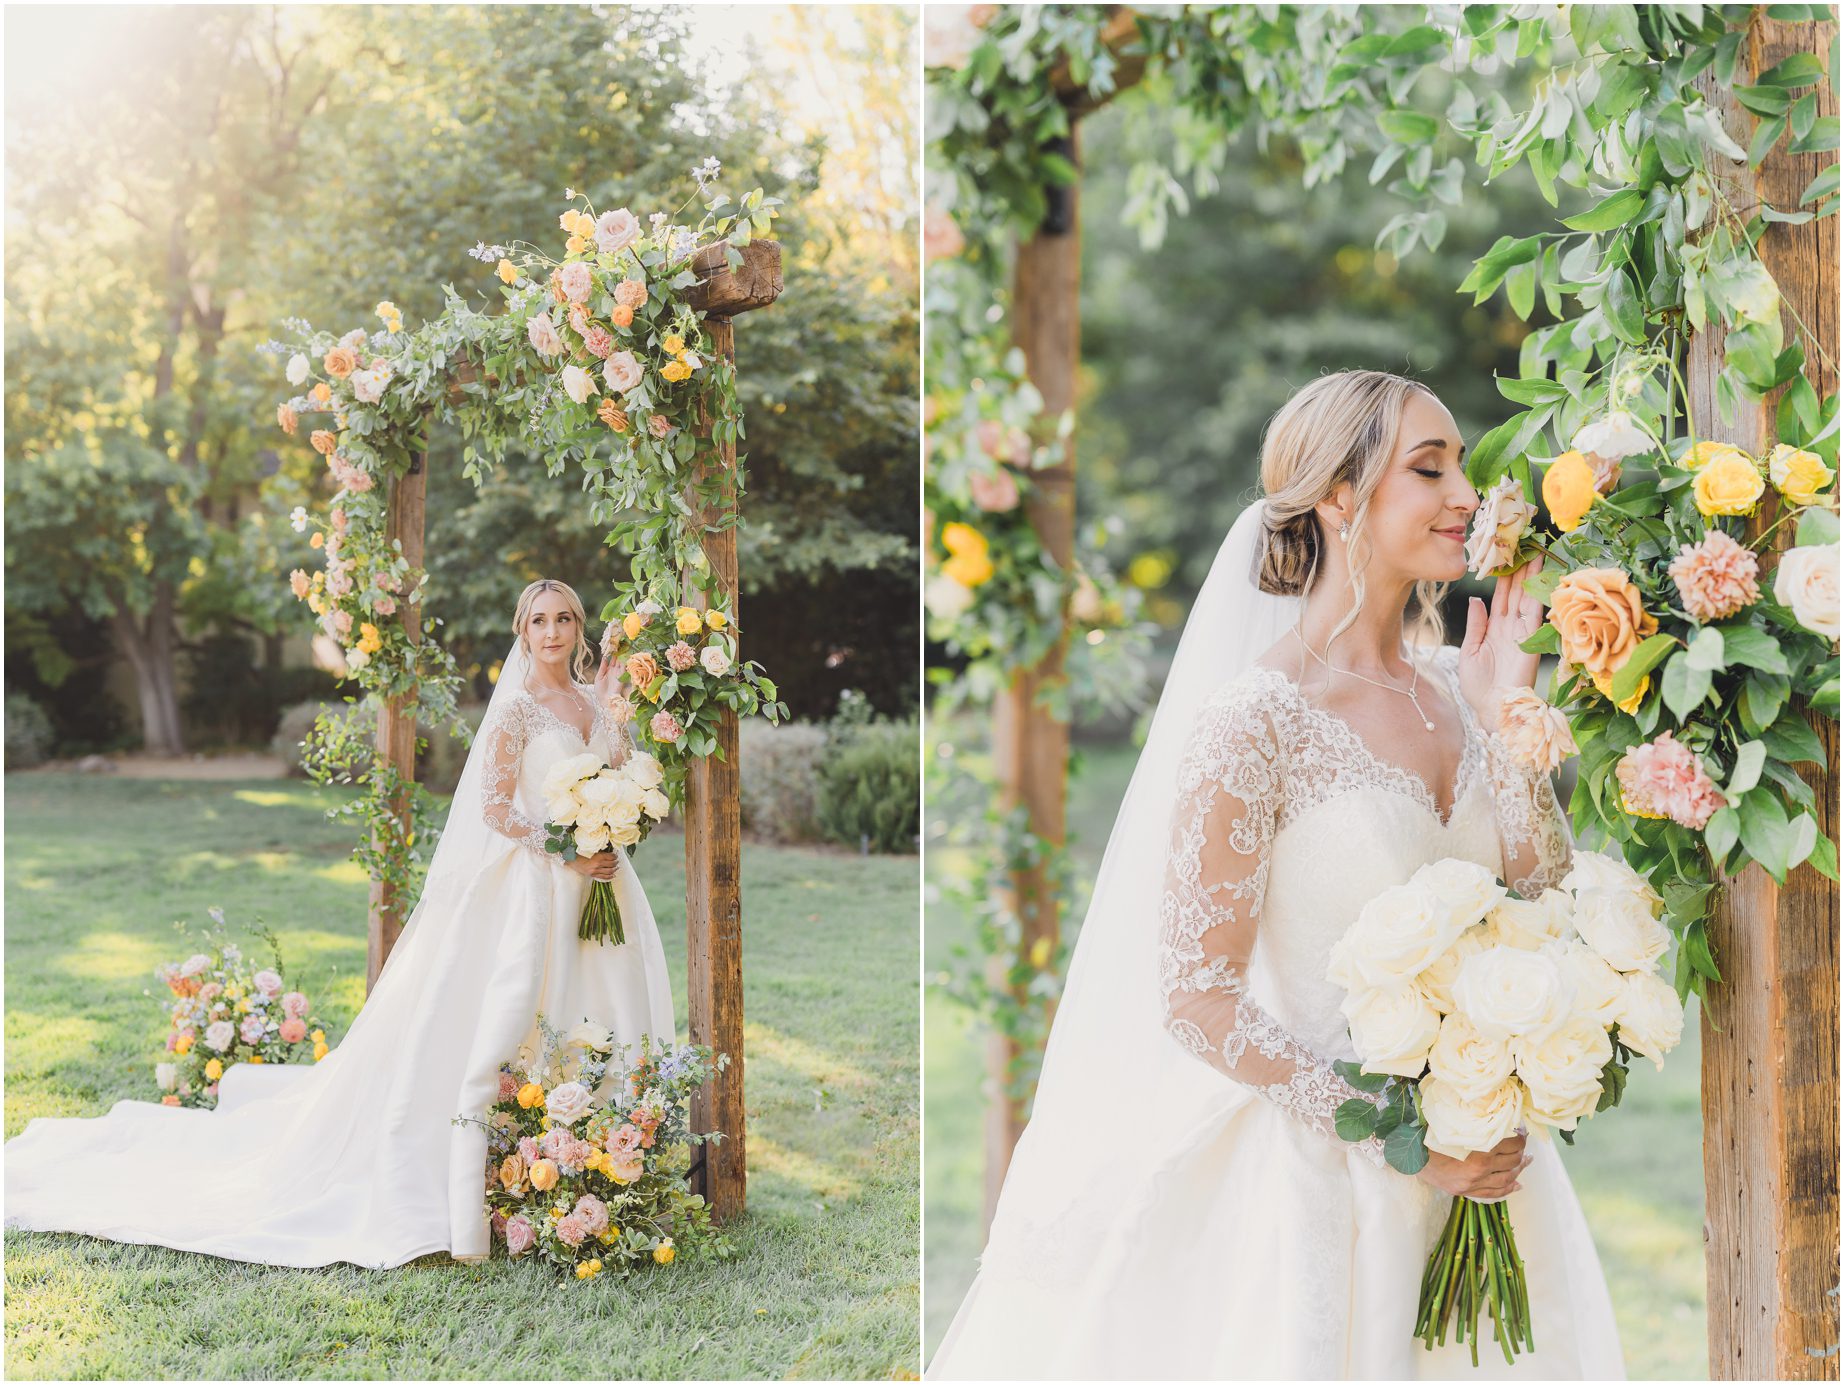 A bride stands near an arch, covered in florals, that is to be used in her wedding. in the second picture she smells the flowers and smiles. The flowers are yellow, peach, white, and pink